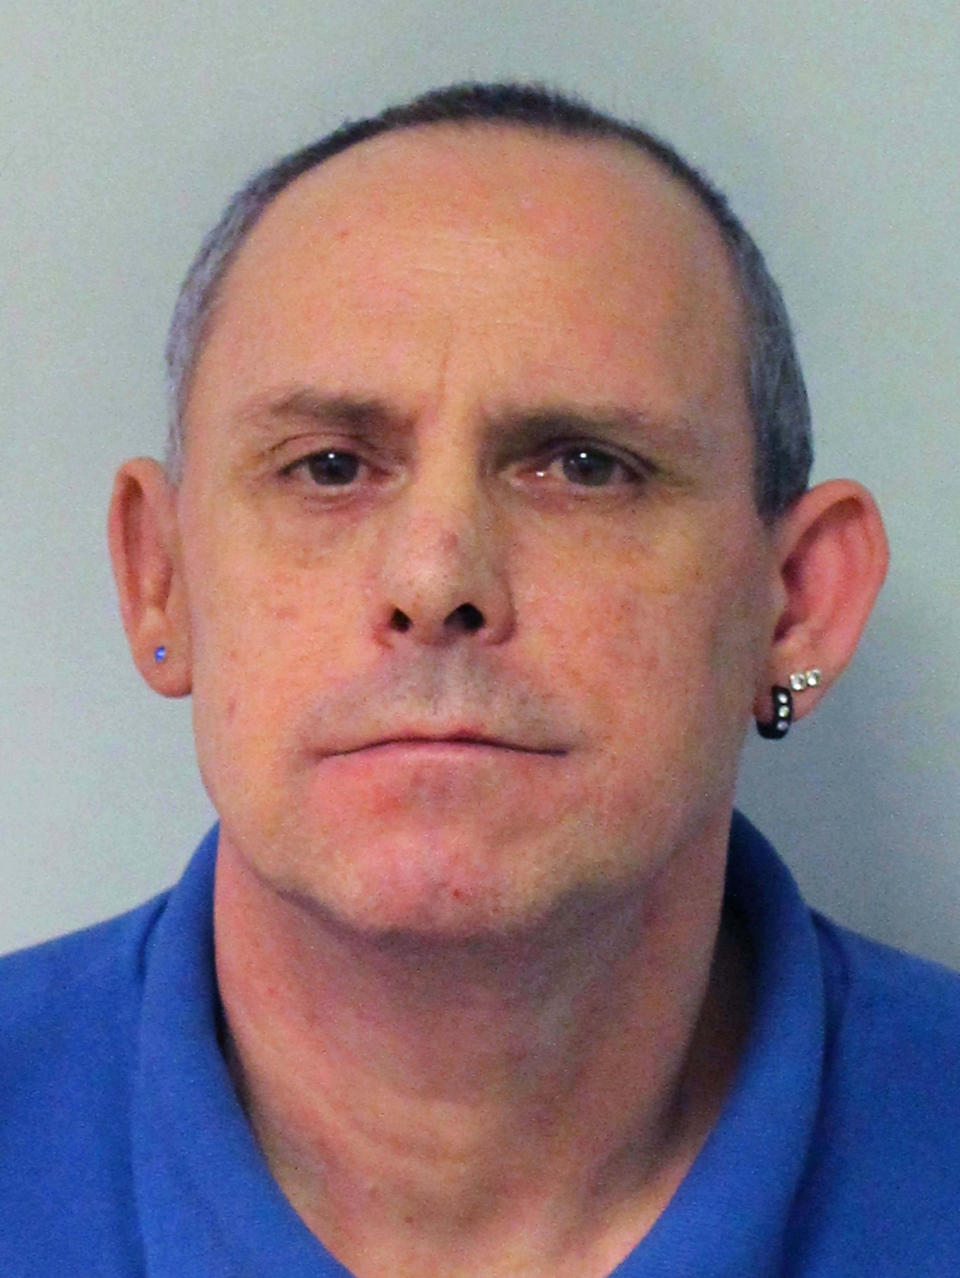 Paedophile Paul Farrell was given a life sentence with a minimum term of 18 years. (PA)